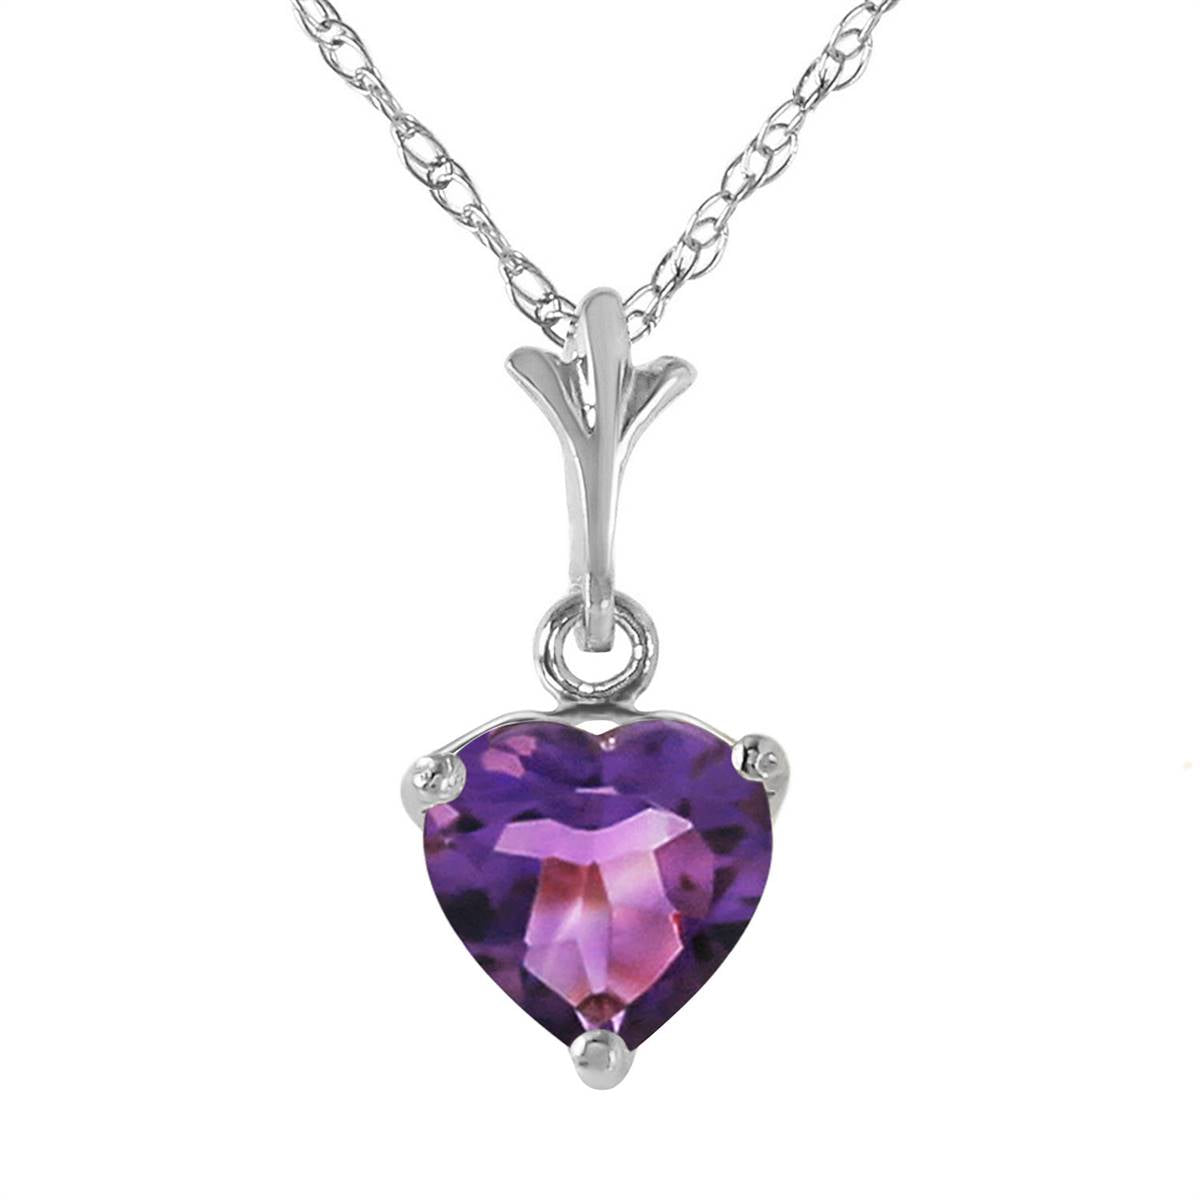 1.15 Carat 14K Solid White Gold Necklace Natural Purple Amethyst